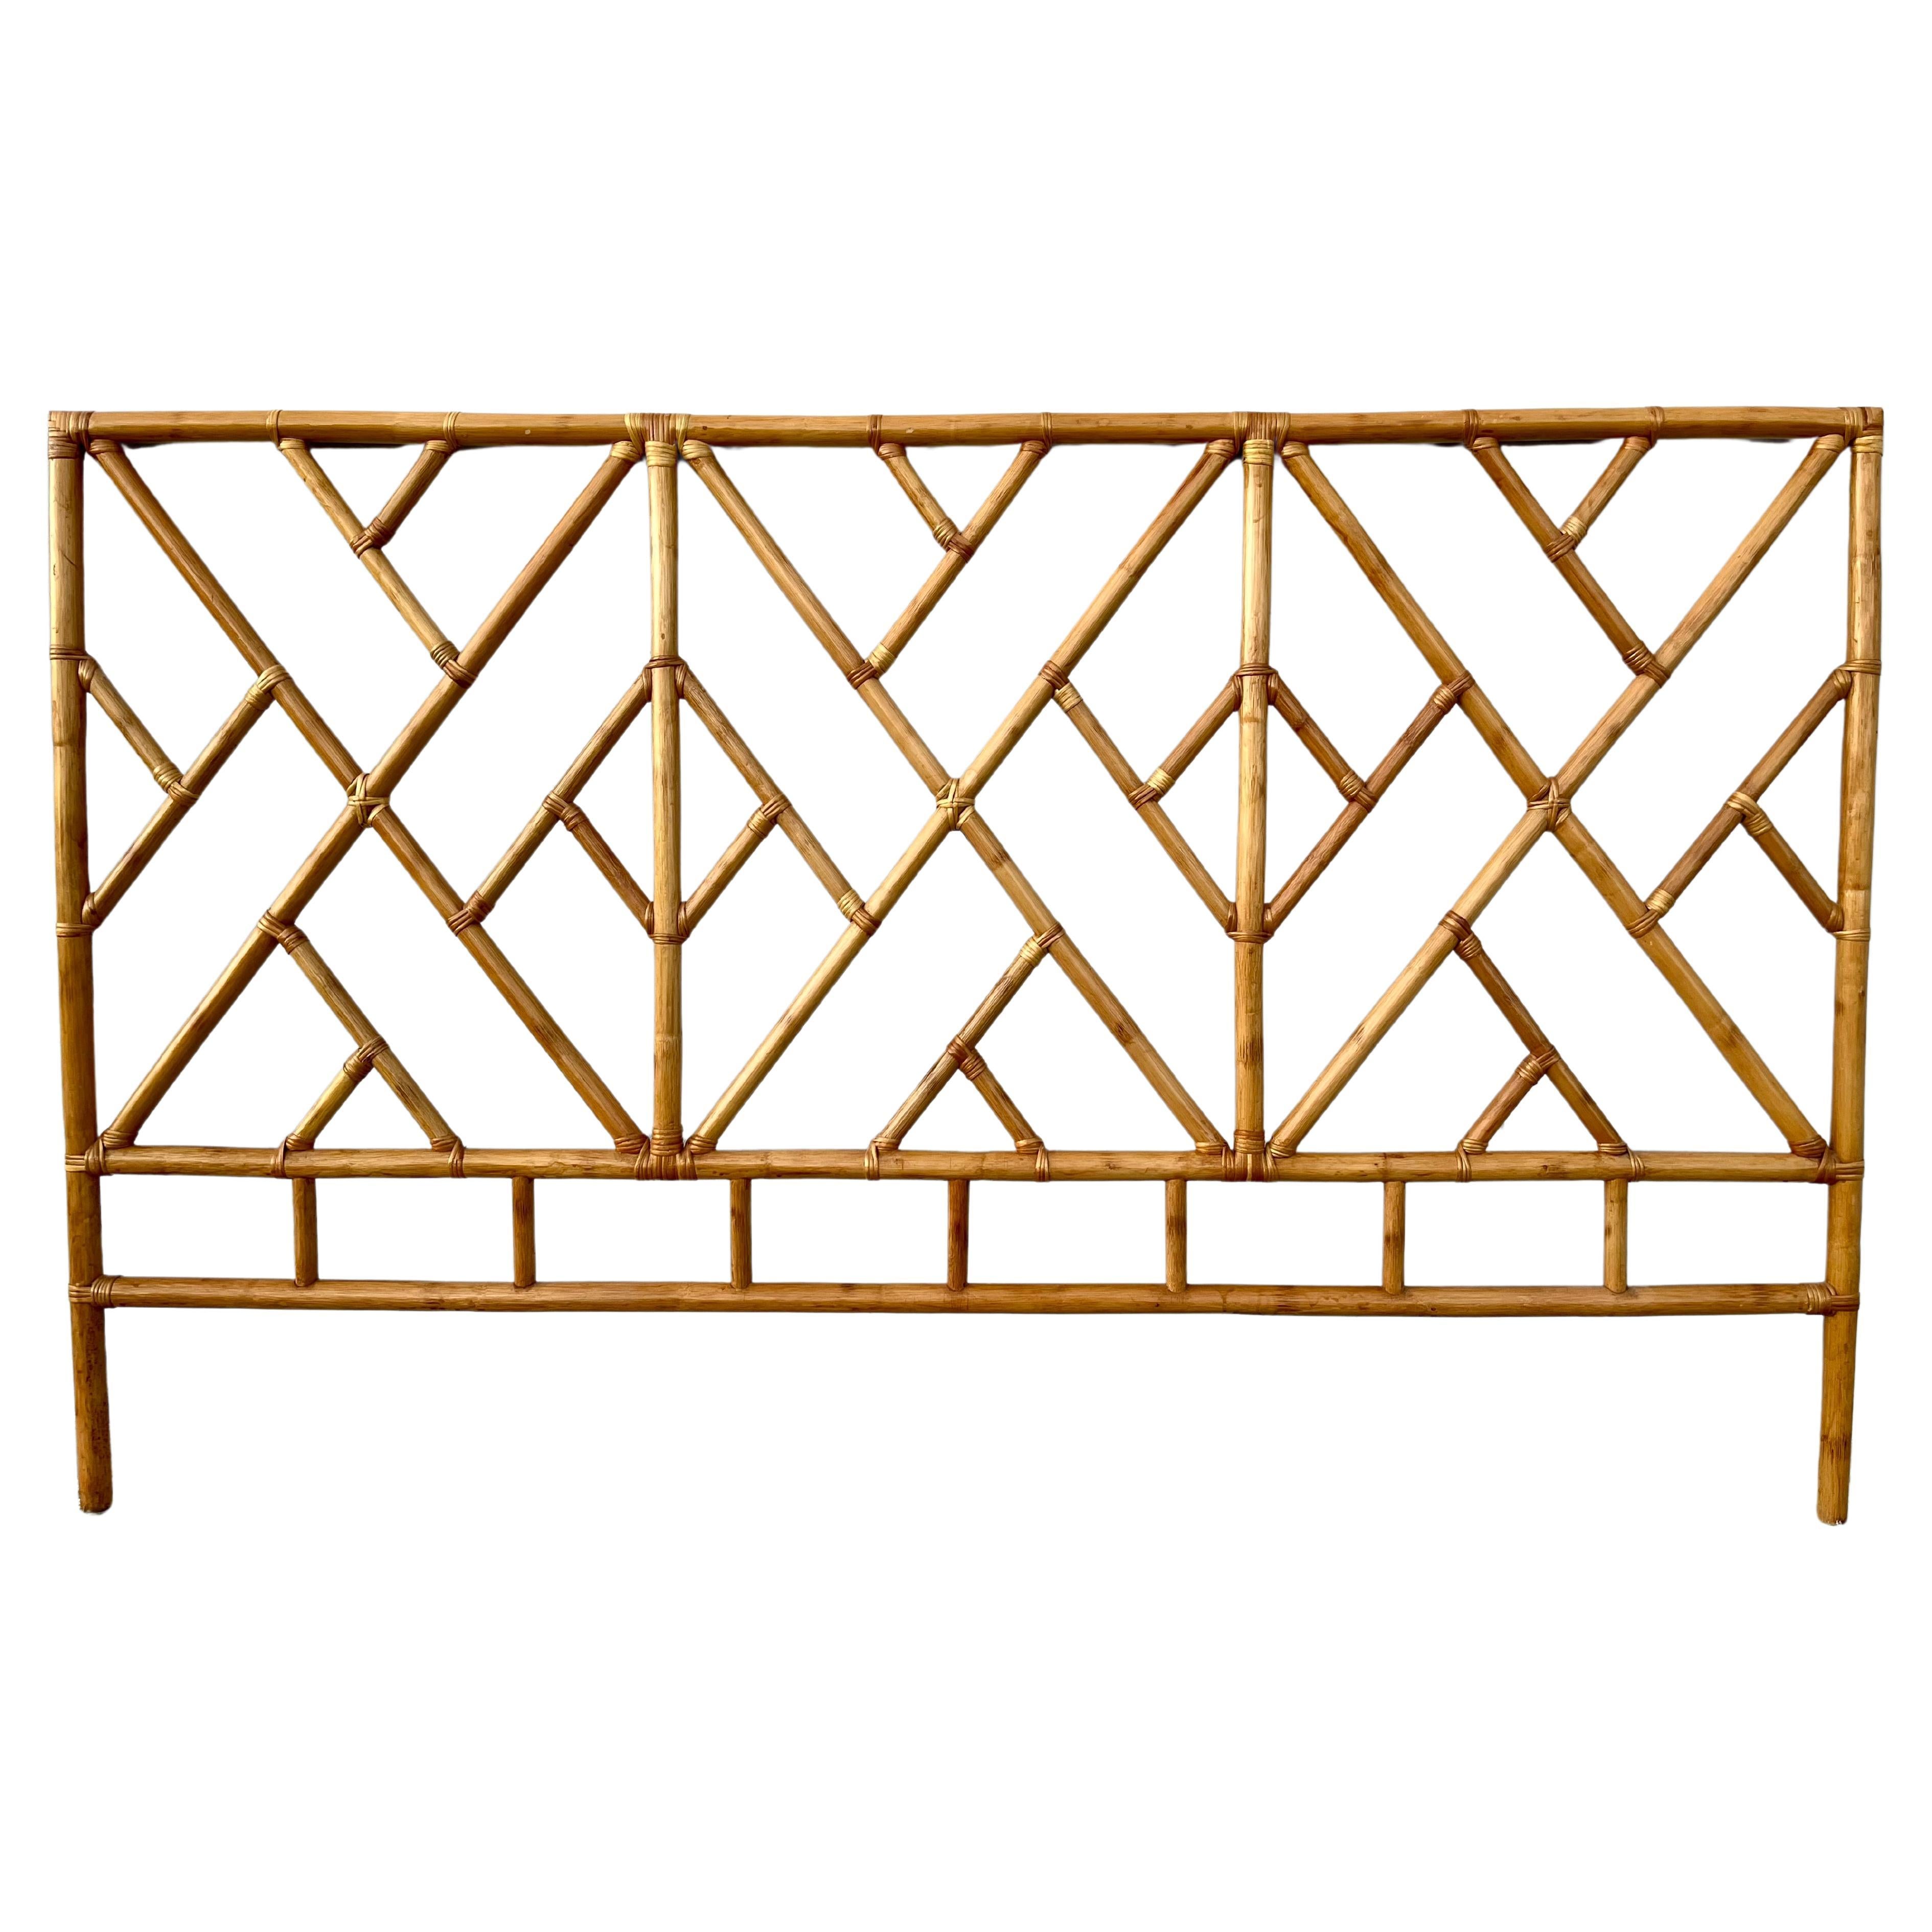 Coastal Style Boho Chic Bamboo and Rattan Queen Size Bed Headboard. Circa 1980s